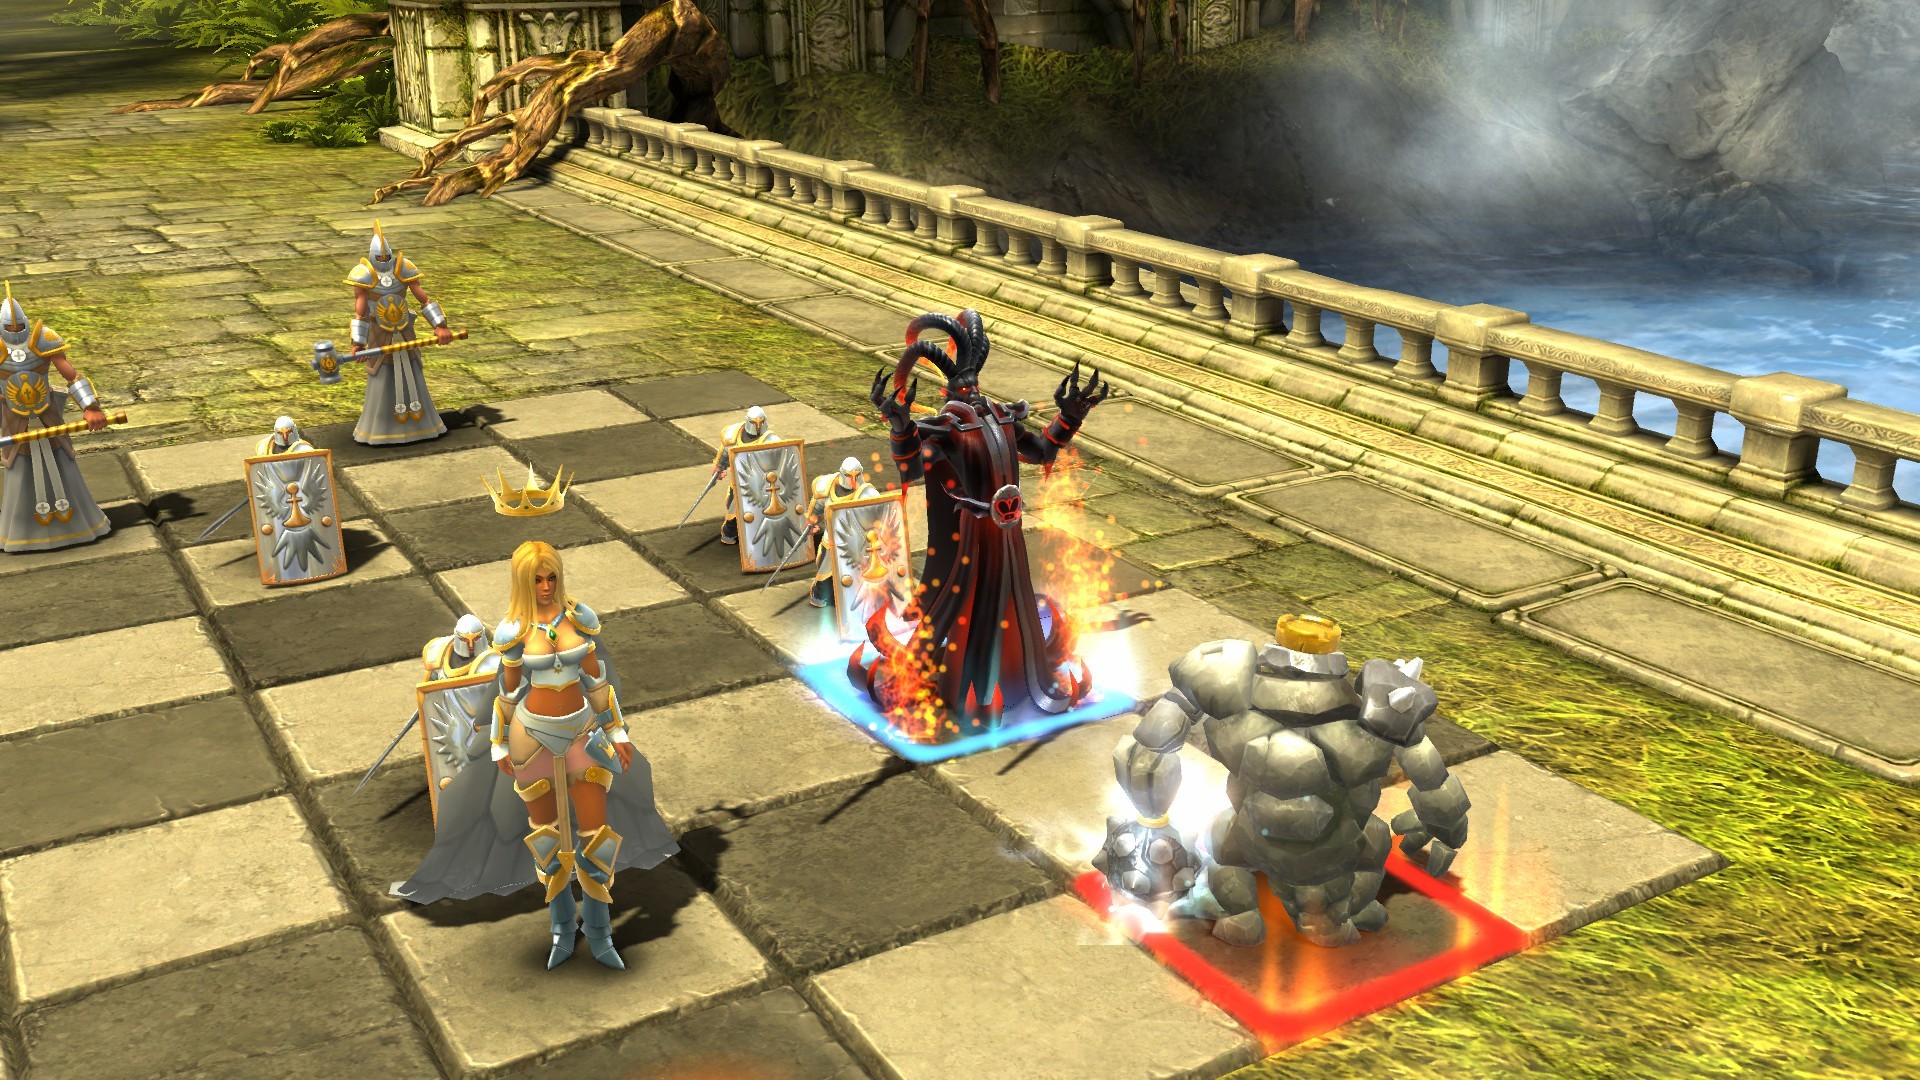 Buy Battle vs Chess from the Humble Store